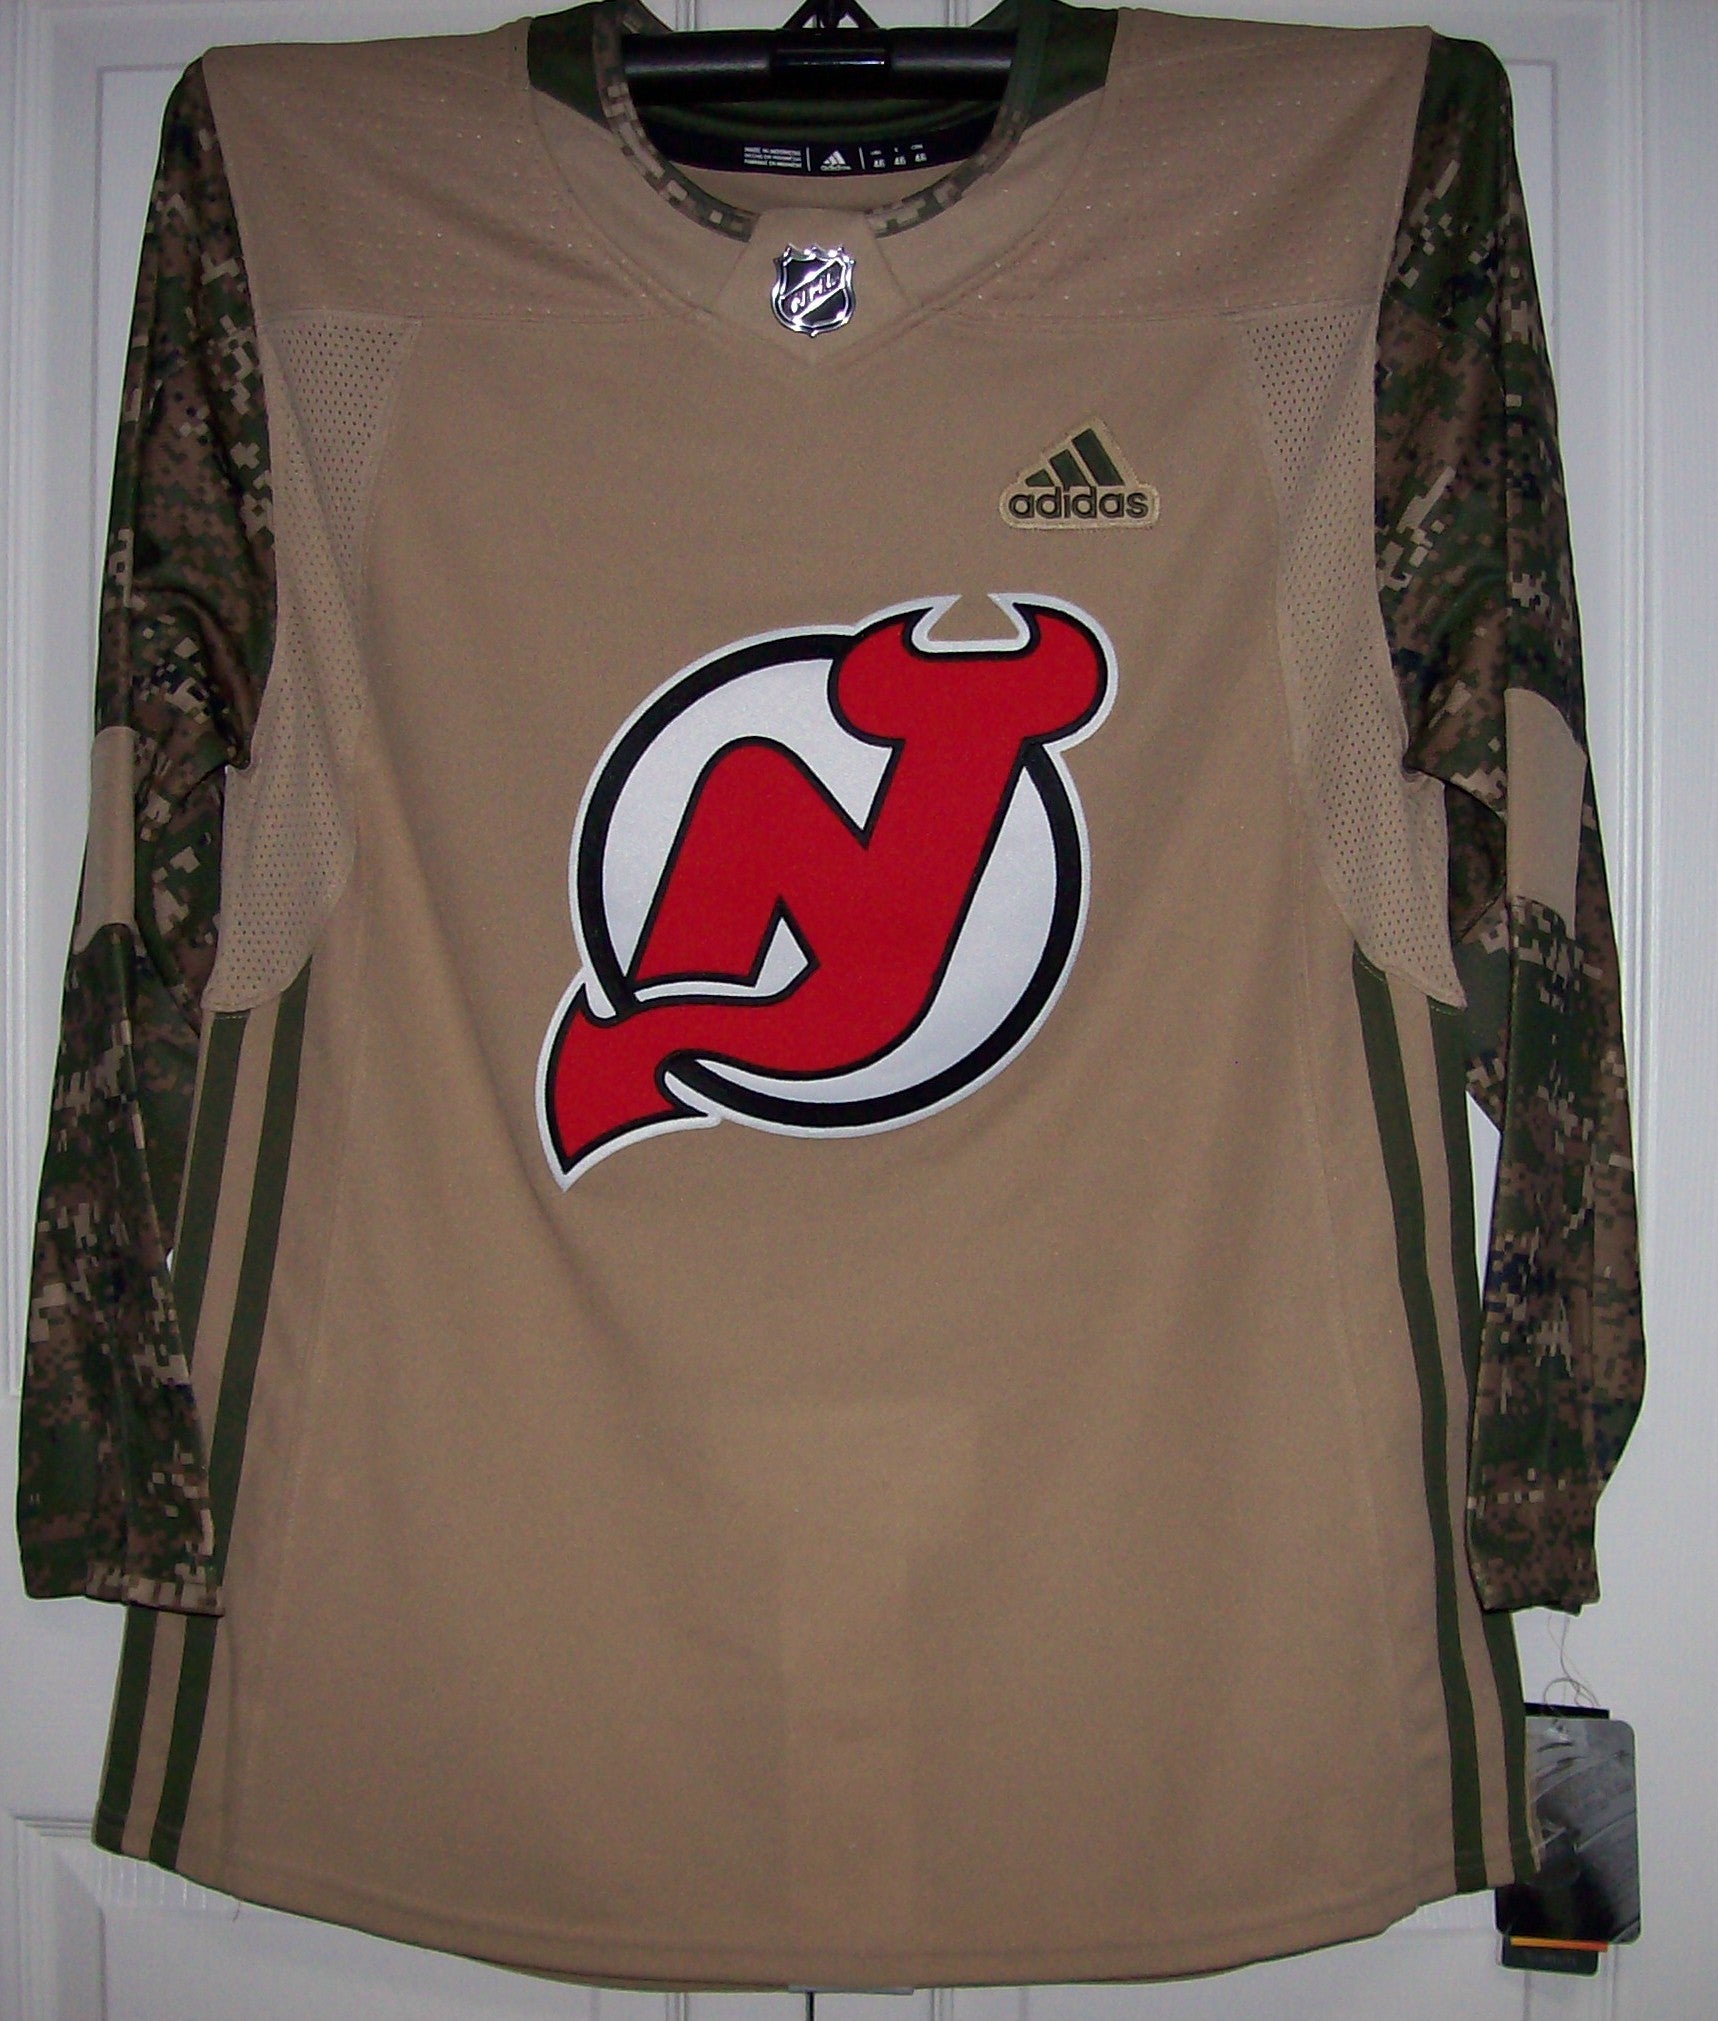 New Jersey Devils Rink Authentic Pro Black T-Shirt